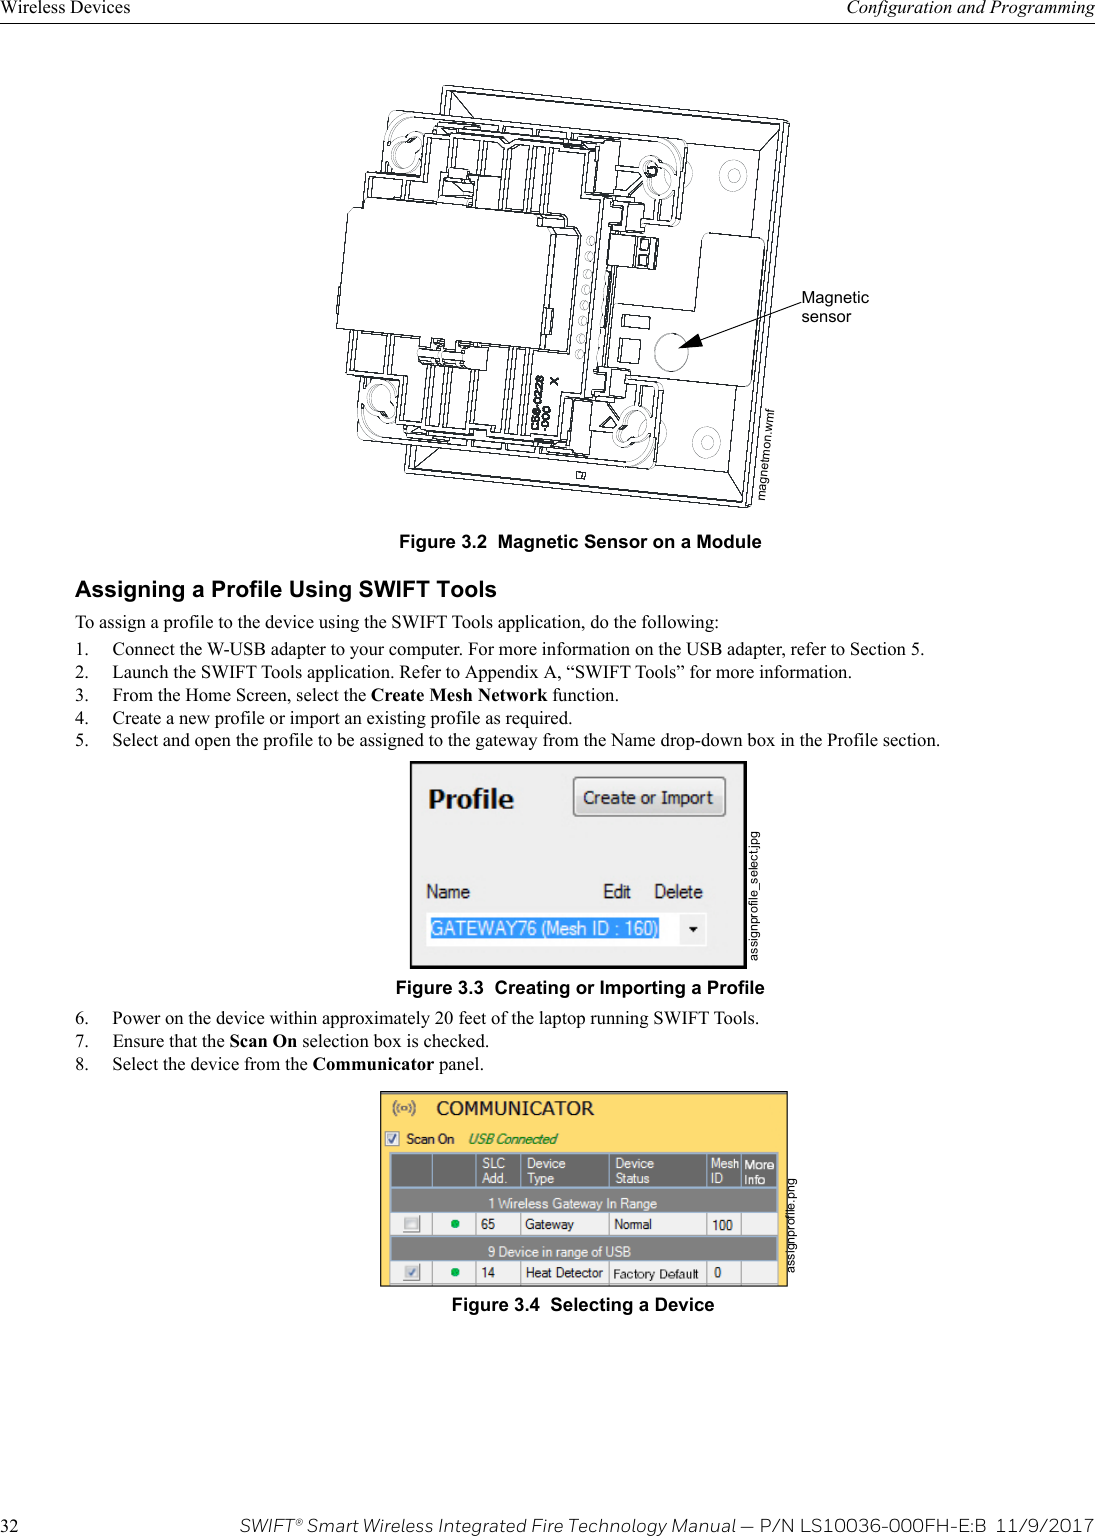 32 SWIFT® Smart Wireless Integrated Fire Technology Manual — P/N LS10036-000FH-E:B  11/9/2017Wireless Devices Configuration and ProgrammingAssigning a Profile Using SWIFT ToolsTo assign a profile to the device using the SWIFT Tools application, do the following:1. Connect the W-USB adapter to your computer. For more information on the USB adapter, refer to Section 5.2. Launch the SWIFT Tools application. Refer to Appendix A, “SWIFT Tools” for more information.3. From the Home Screen, select the Create Mesh Network function.4. Create a new profile or import an existing profile as required. 5. Select and open the profile to be assigned to the gateway from the Name drop-down box in the Profile section.  6. Power on the device within approximately 20 feet of the laptop running SWIFT Tools.7. Ensure that the Scan On selection box is checked.8. Select the device from the Communicator panel. Figure 3.2  Magnetic Sensor on a Modulemagnetmon.wmfMagnetic sensorFigure 3.3  Creating or Importing a Profileassignprofile_select.jpgFigure 3.4  Selecting a Deviceassignprofile.png